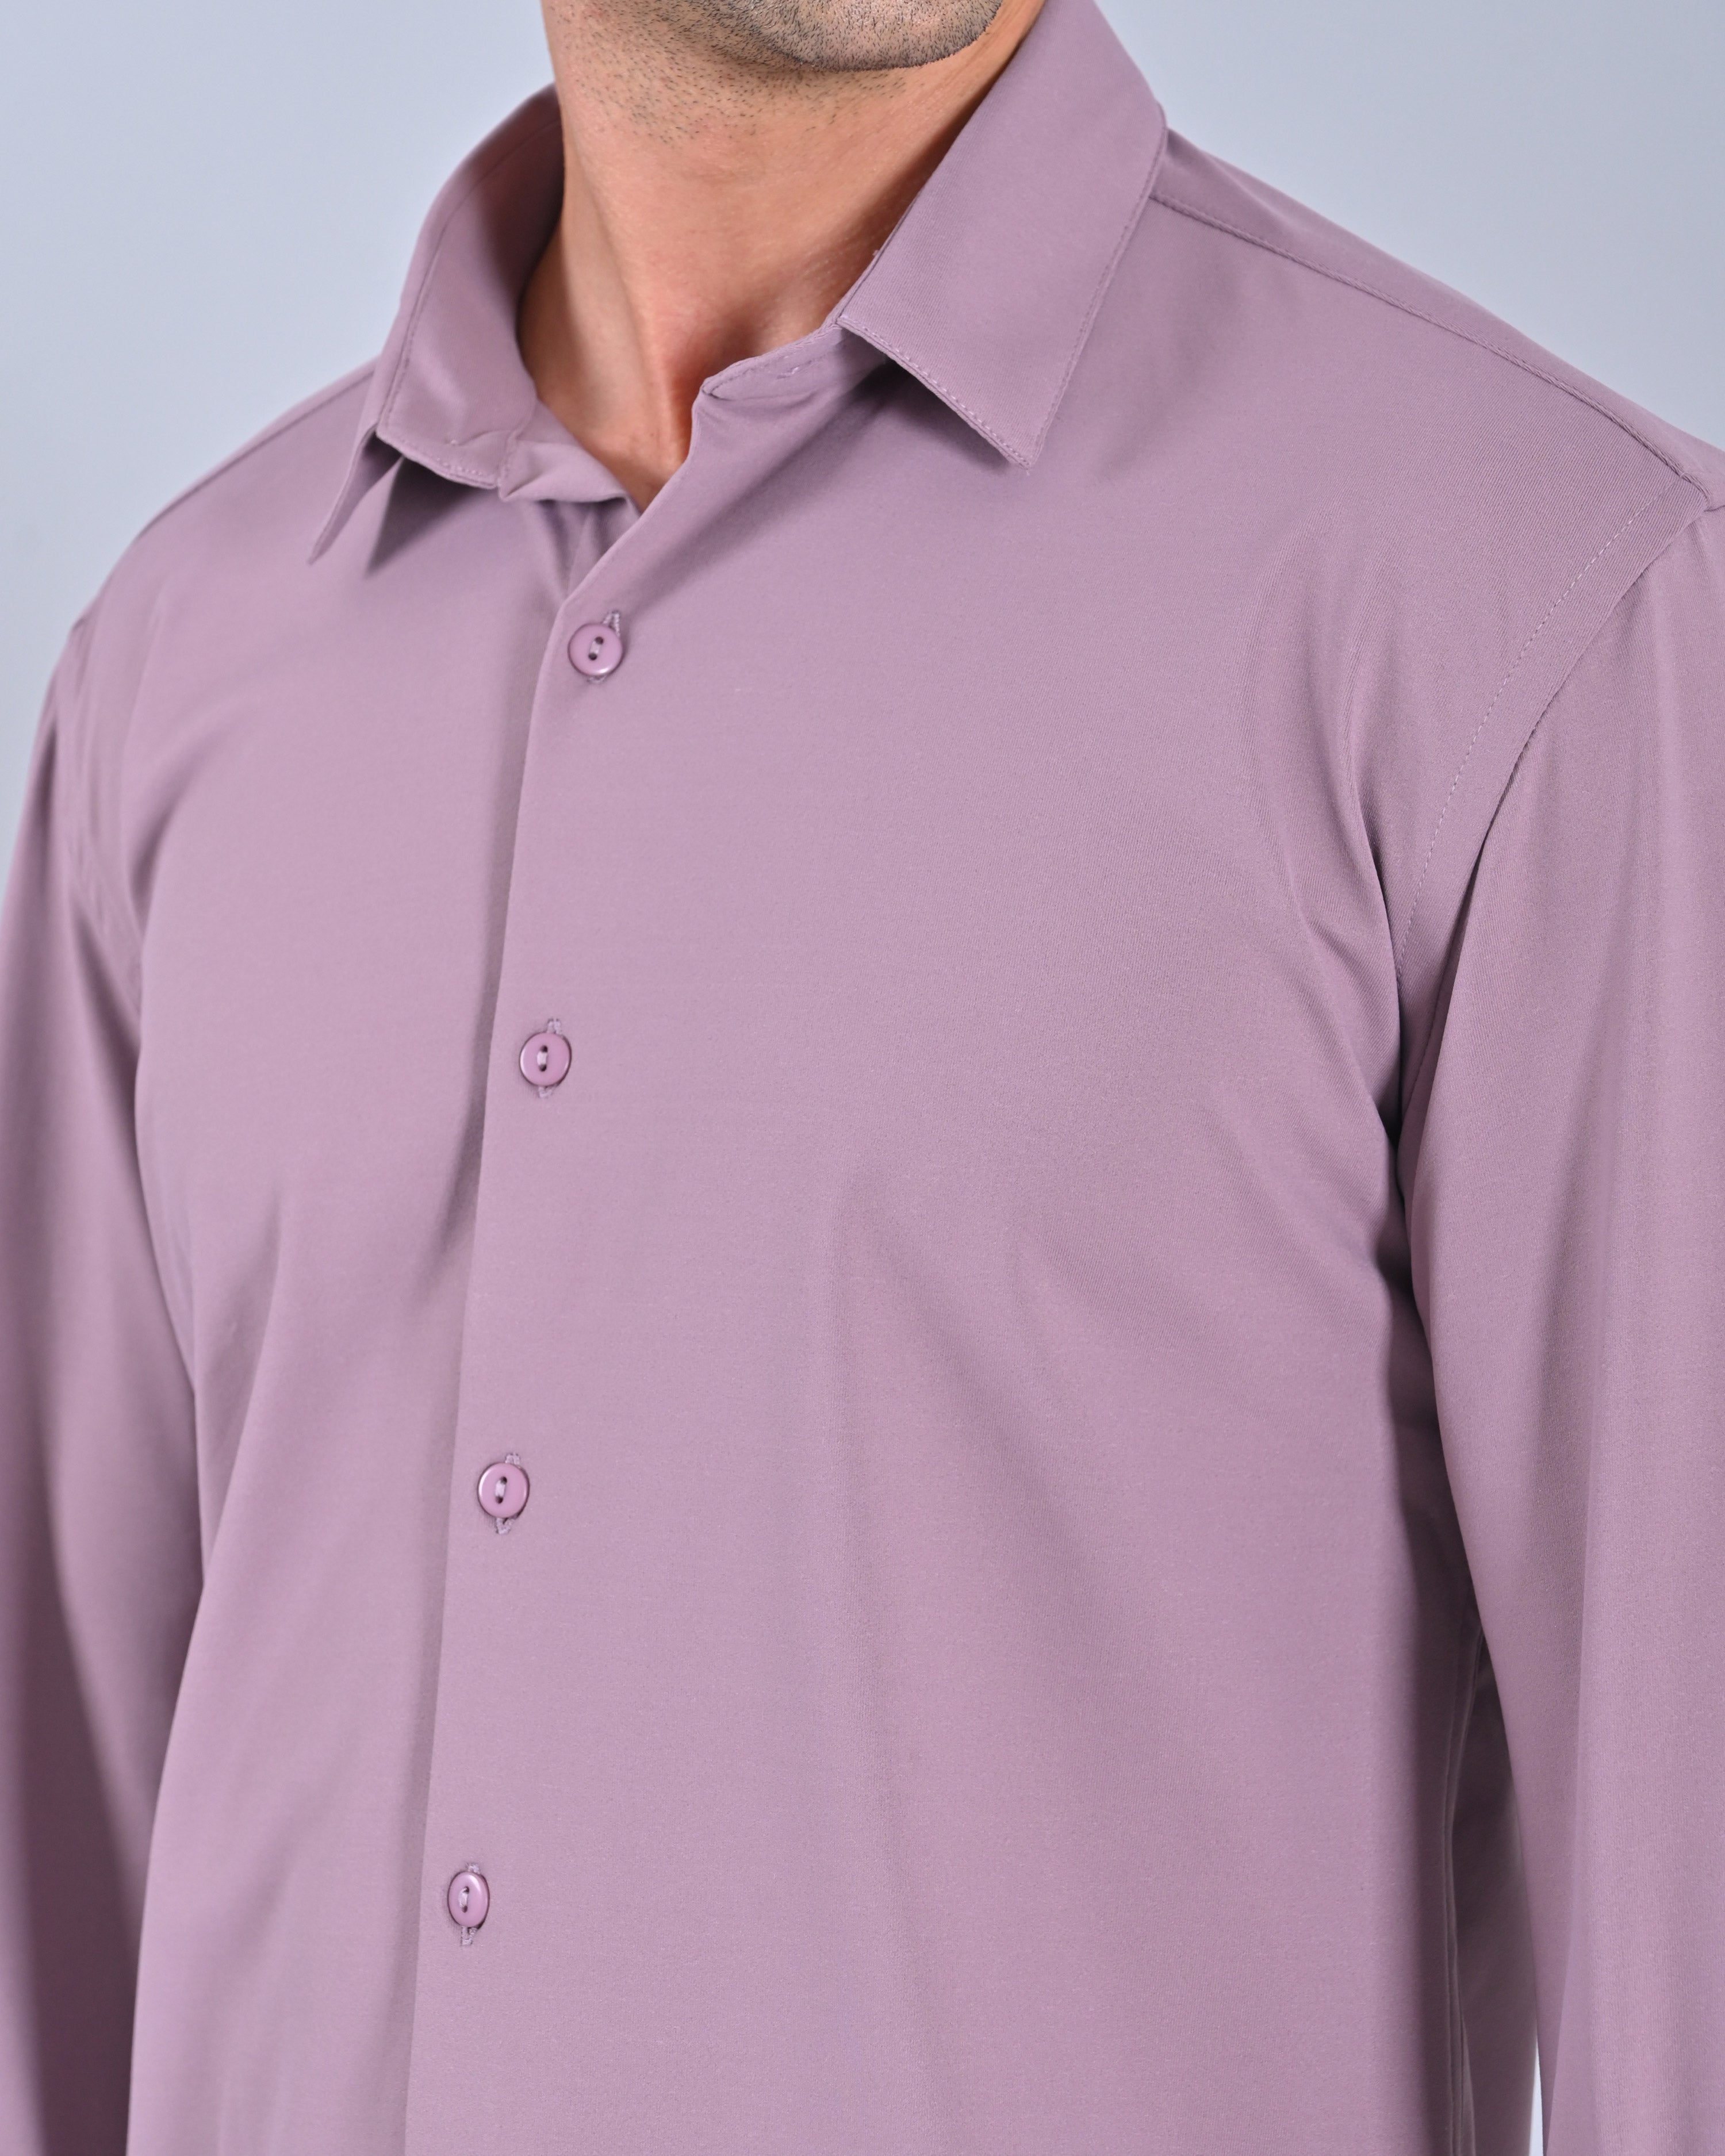 Men's Solid Classic Onion Pink Full Sleeve Shirt